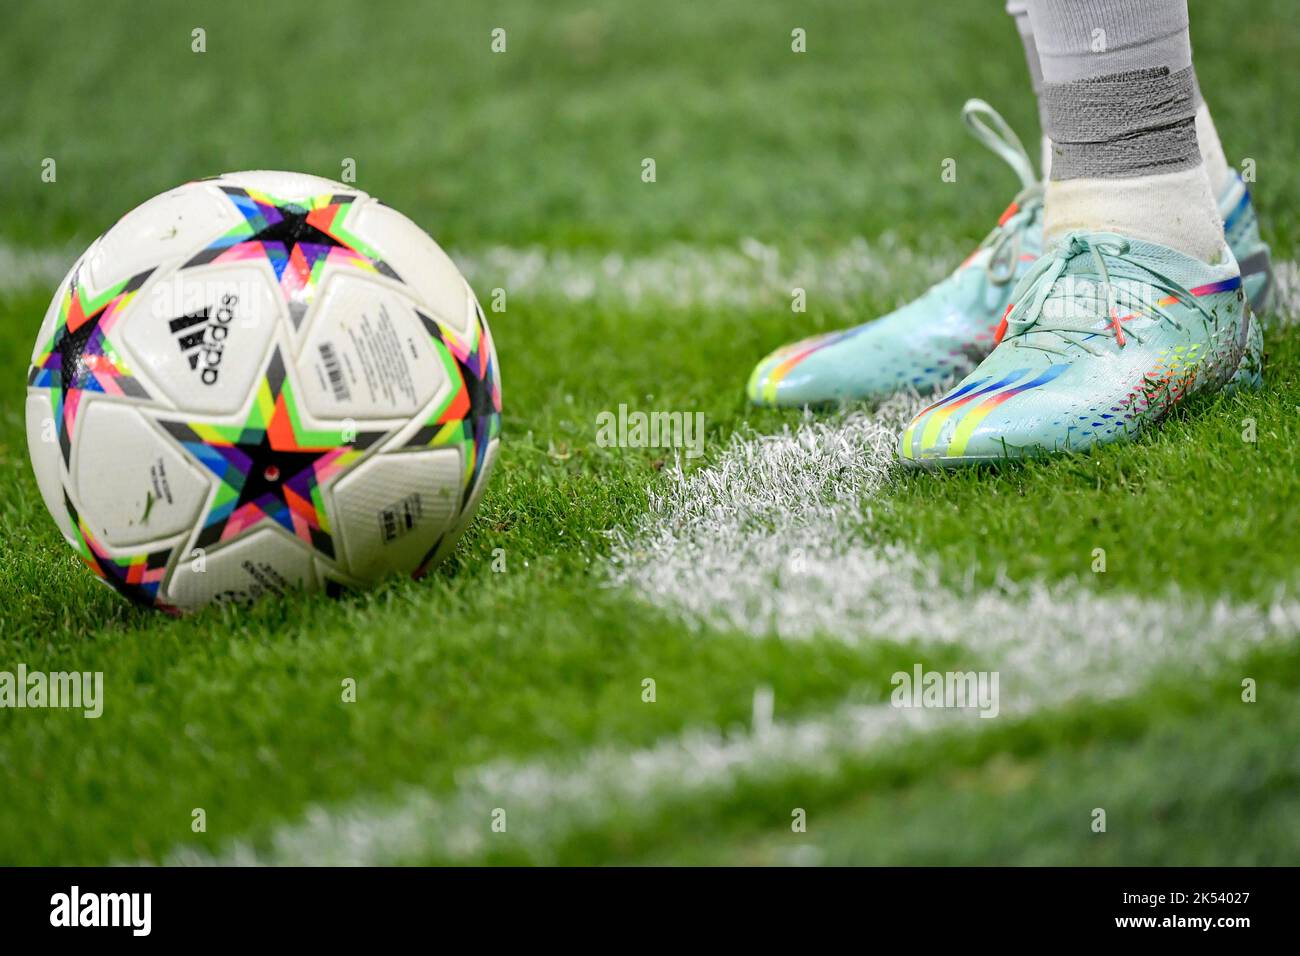 Adidas Speedportal shoes and Pro Void ball are seen during the Champions League Group C football match between FC Internazionale and FCB Barcelona at Stock Photo